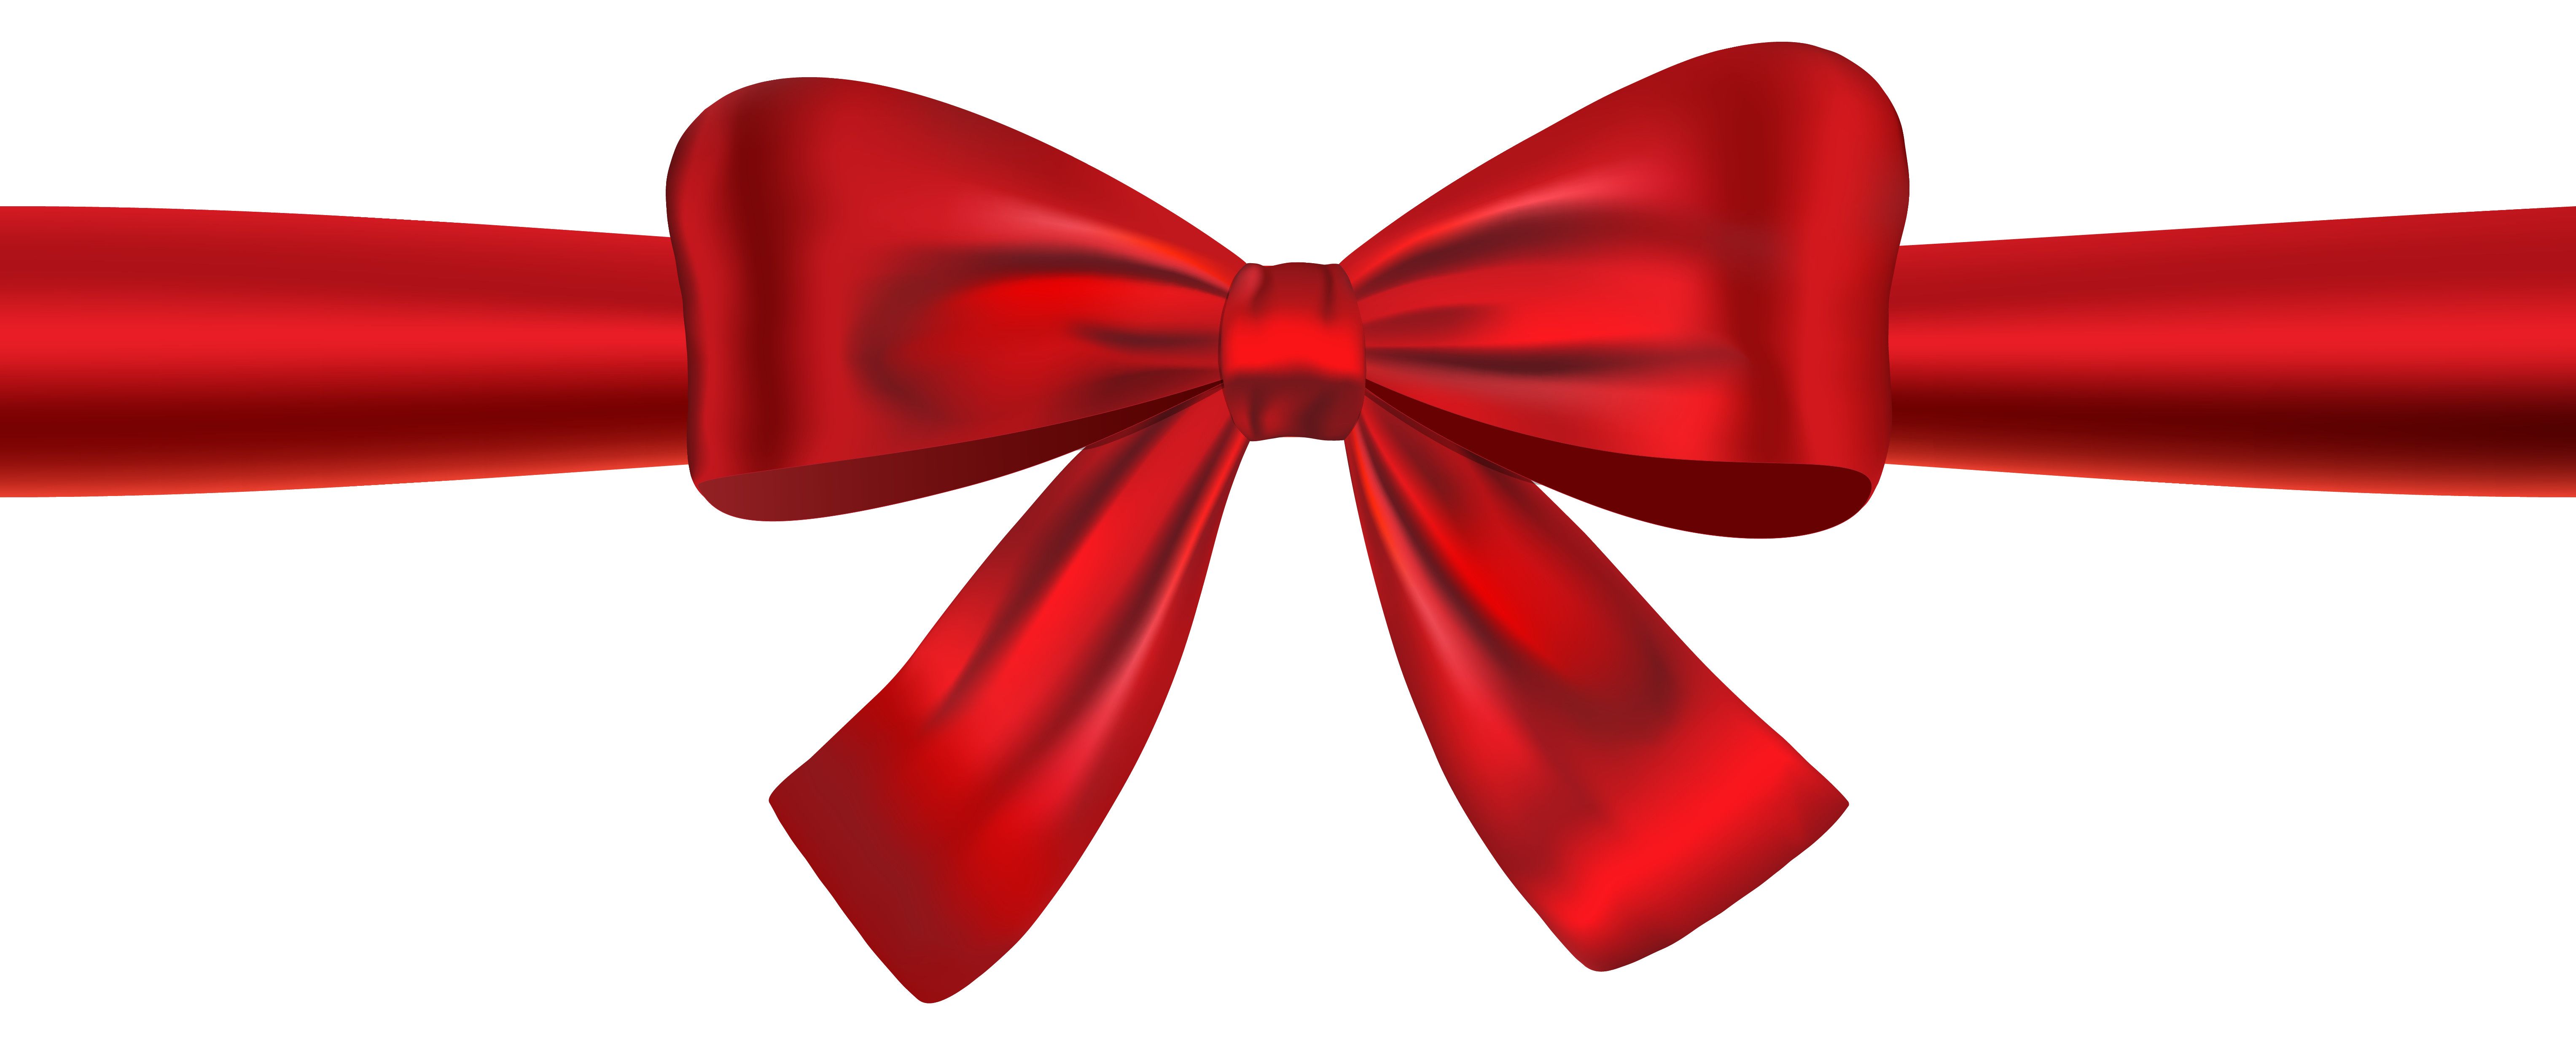 Bows clipart ribbon. Red and bow clippart